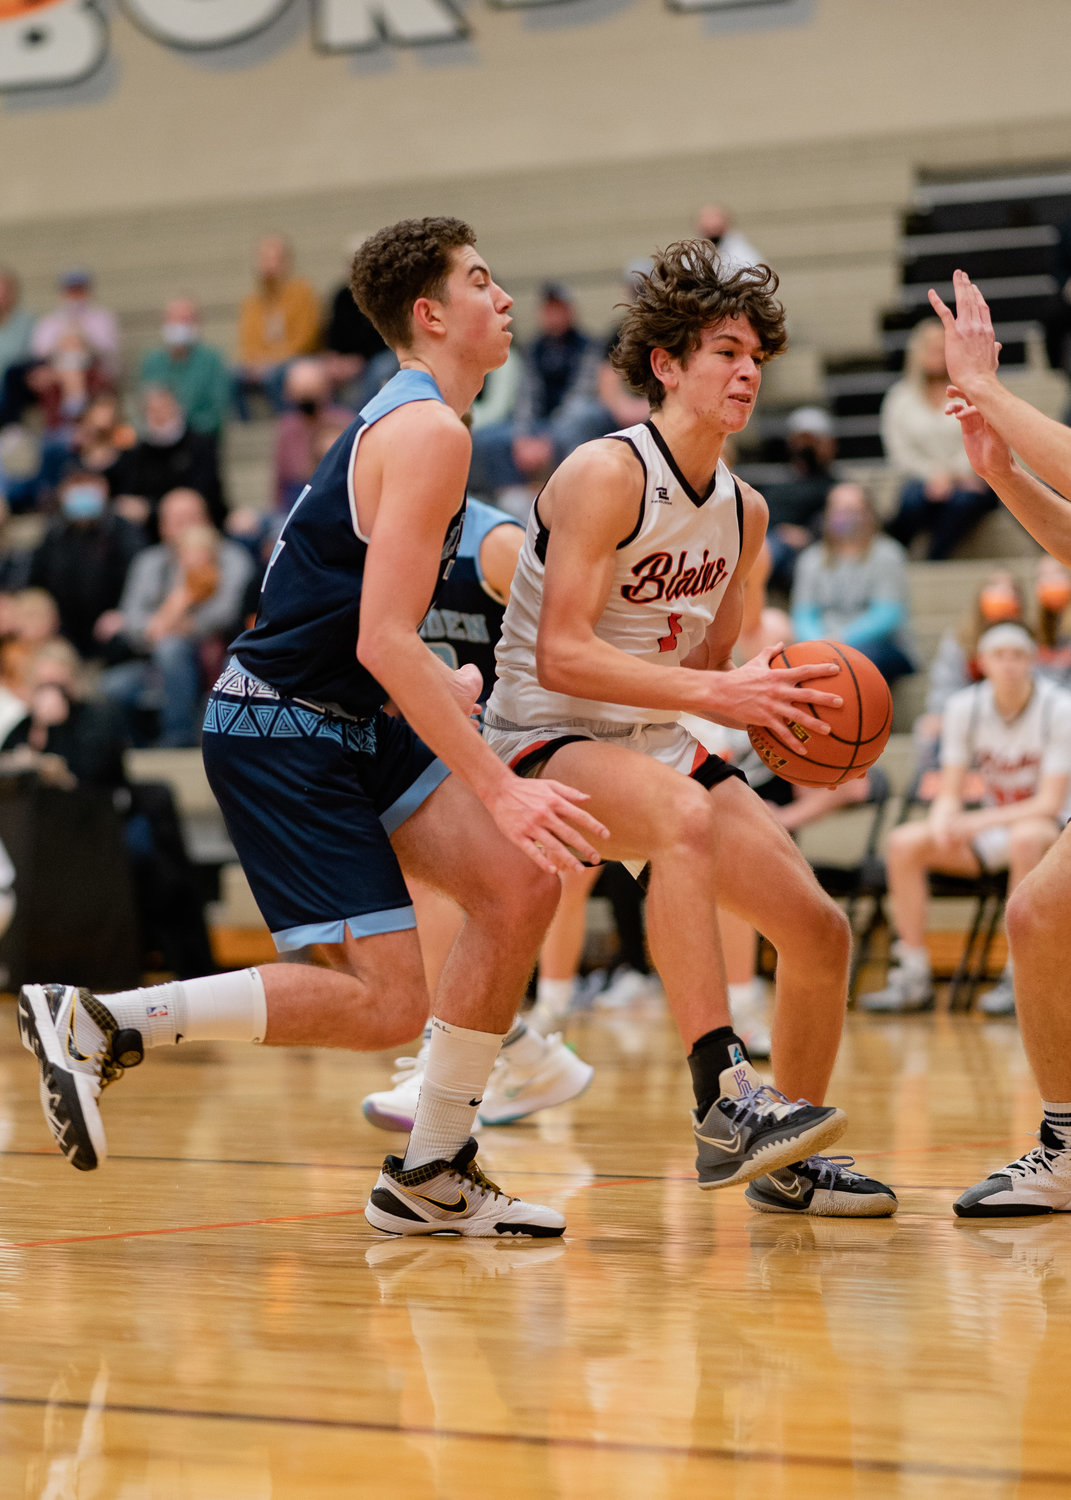 Lucas Smith with the ball in Borderites loss to the Lyncs Monday. The game ended with a 64-51 score.